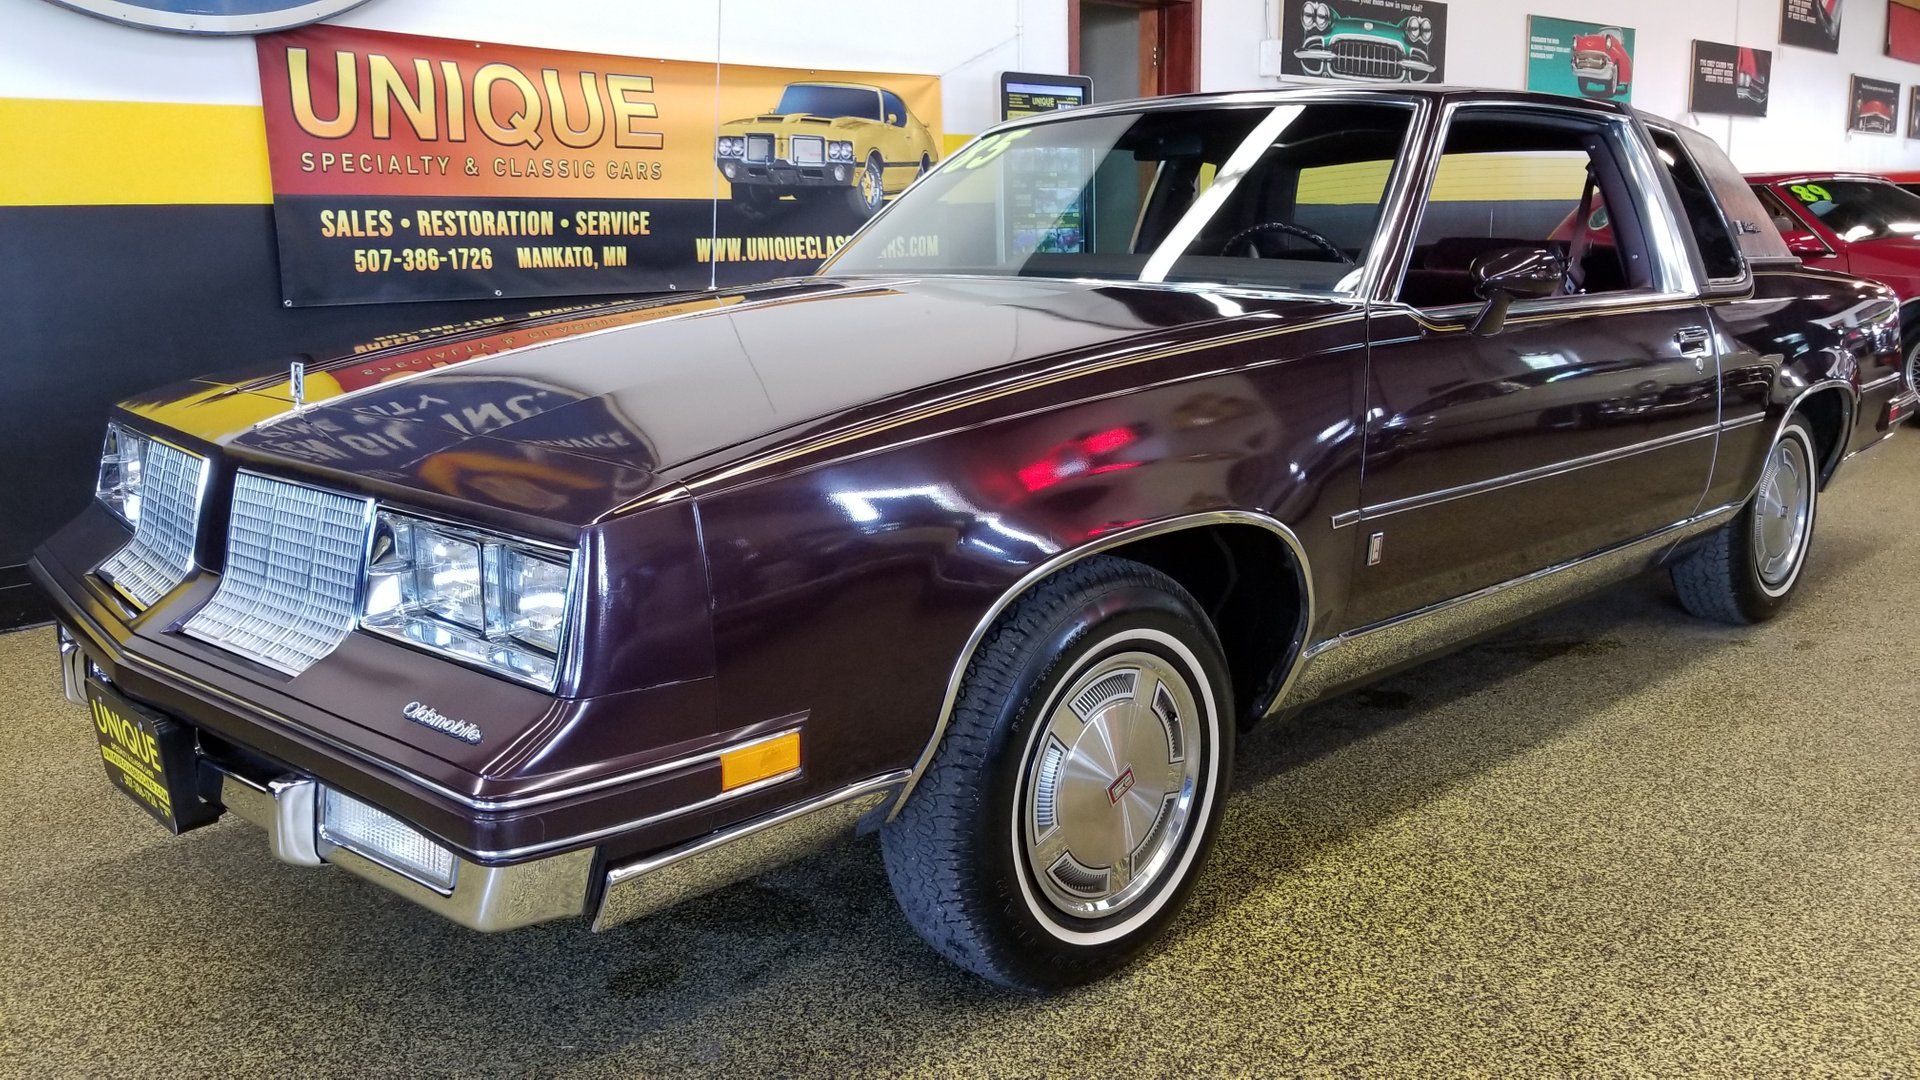 1920x1080 1985 Oldsmobile Cutlass Supreme 2dr for sale #166438 Motorious.